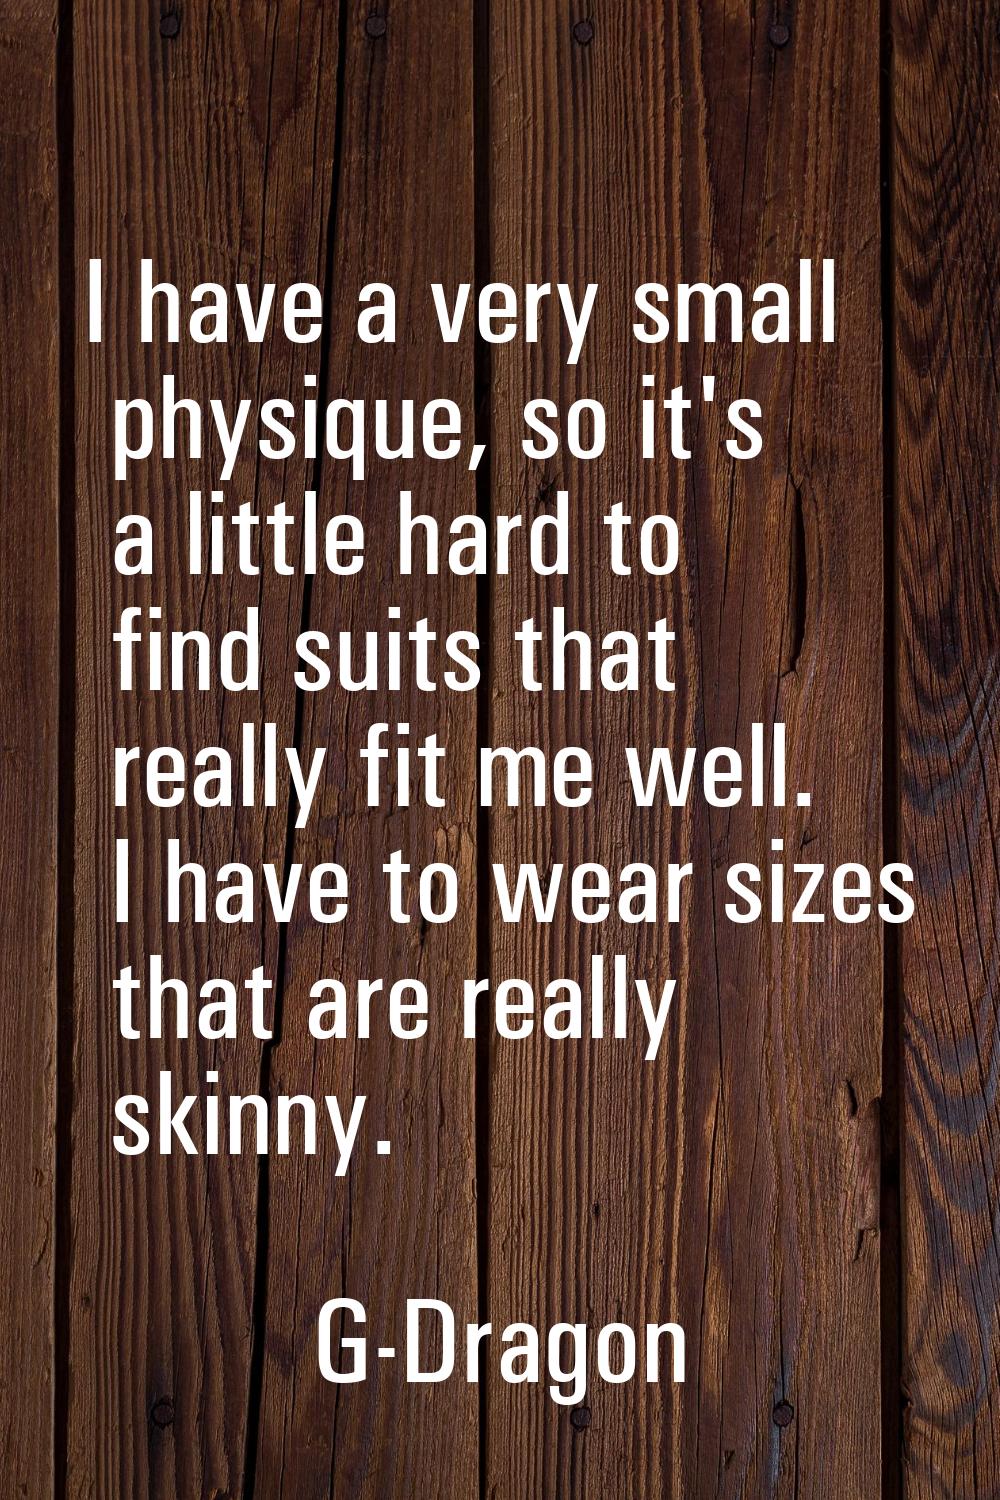 I have a very small physique, so it's a little hard to find suits that really fit me well. I have t